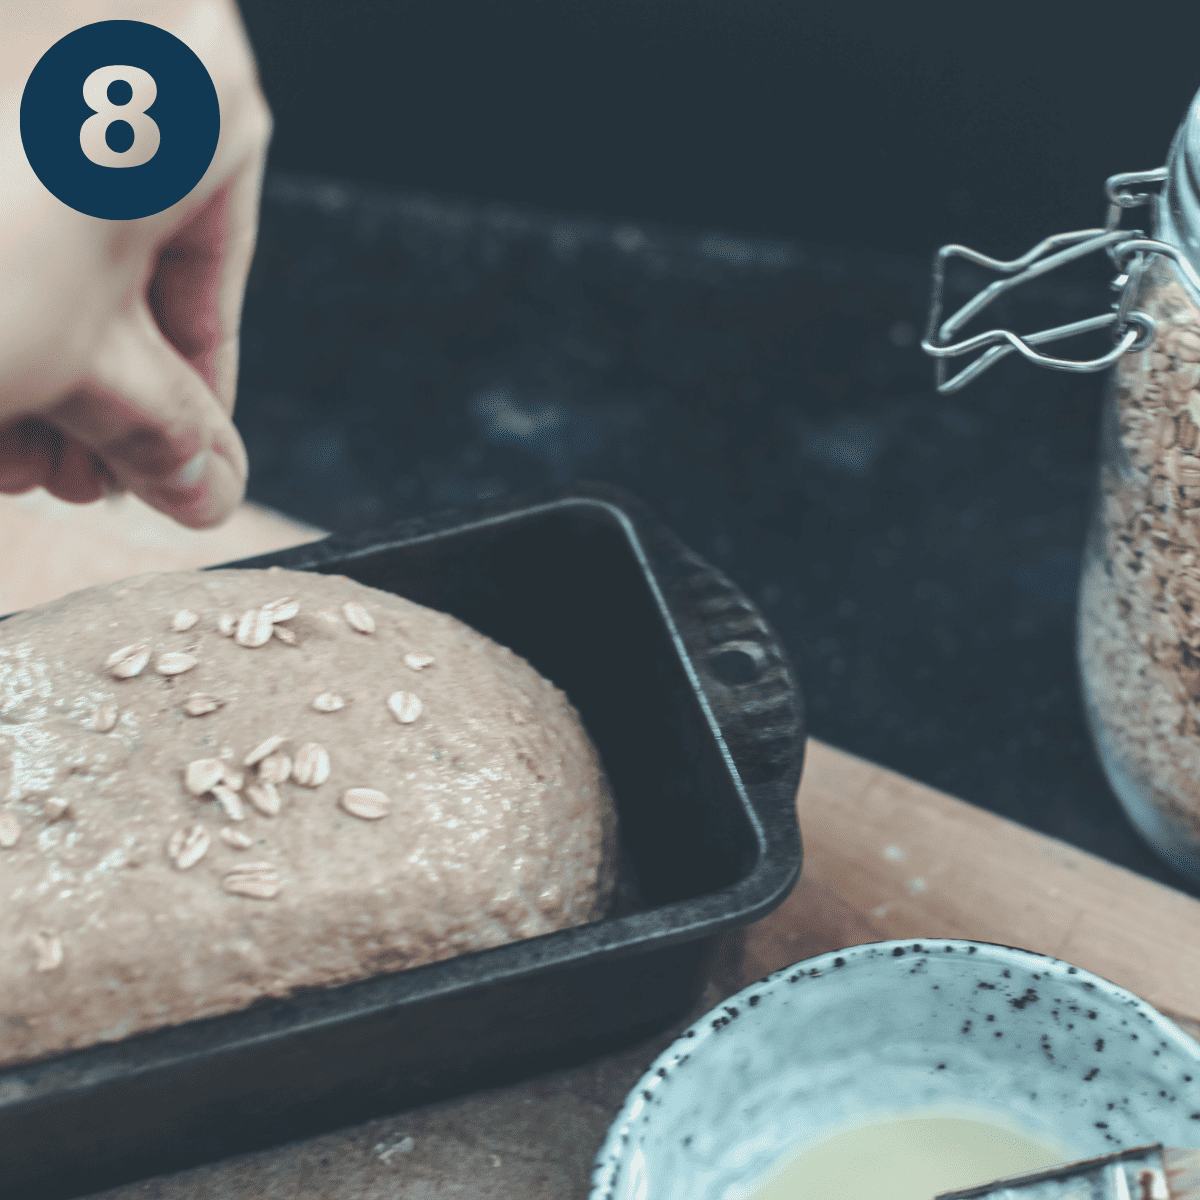 Placing oatmeal dough in a loaf tin and sprinkling with oats.